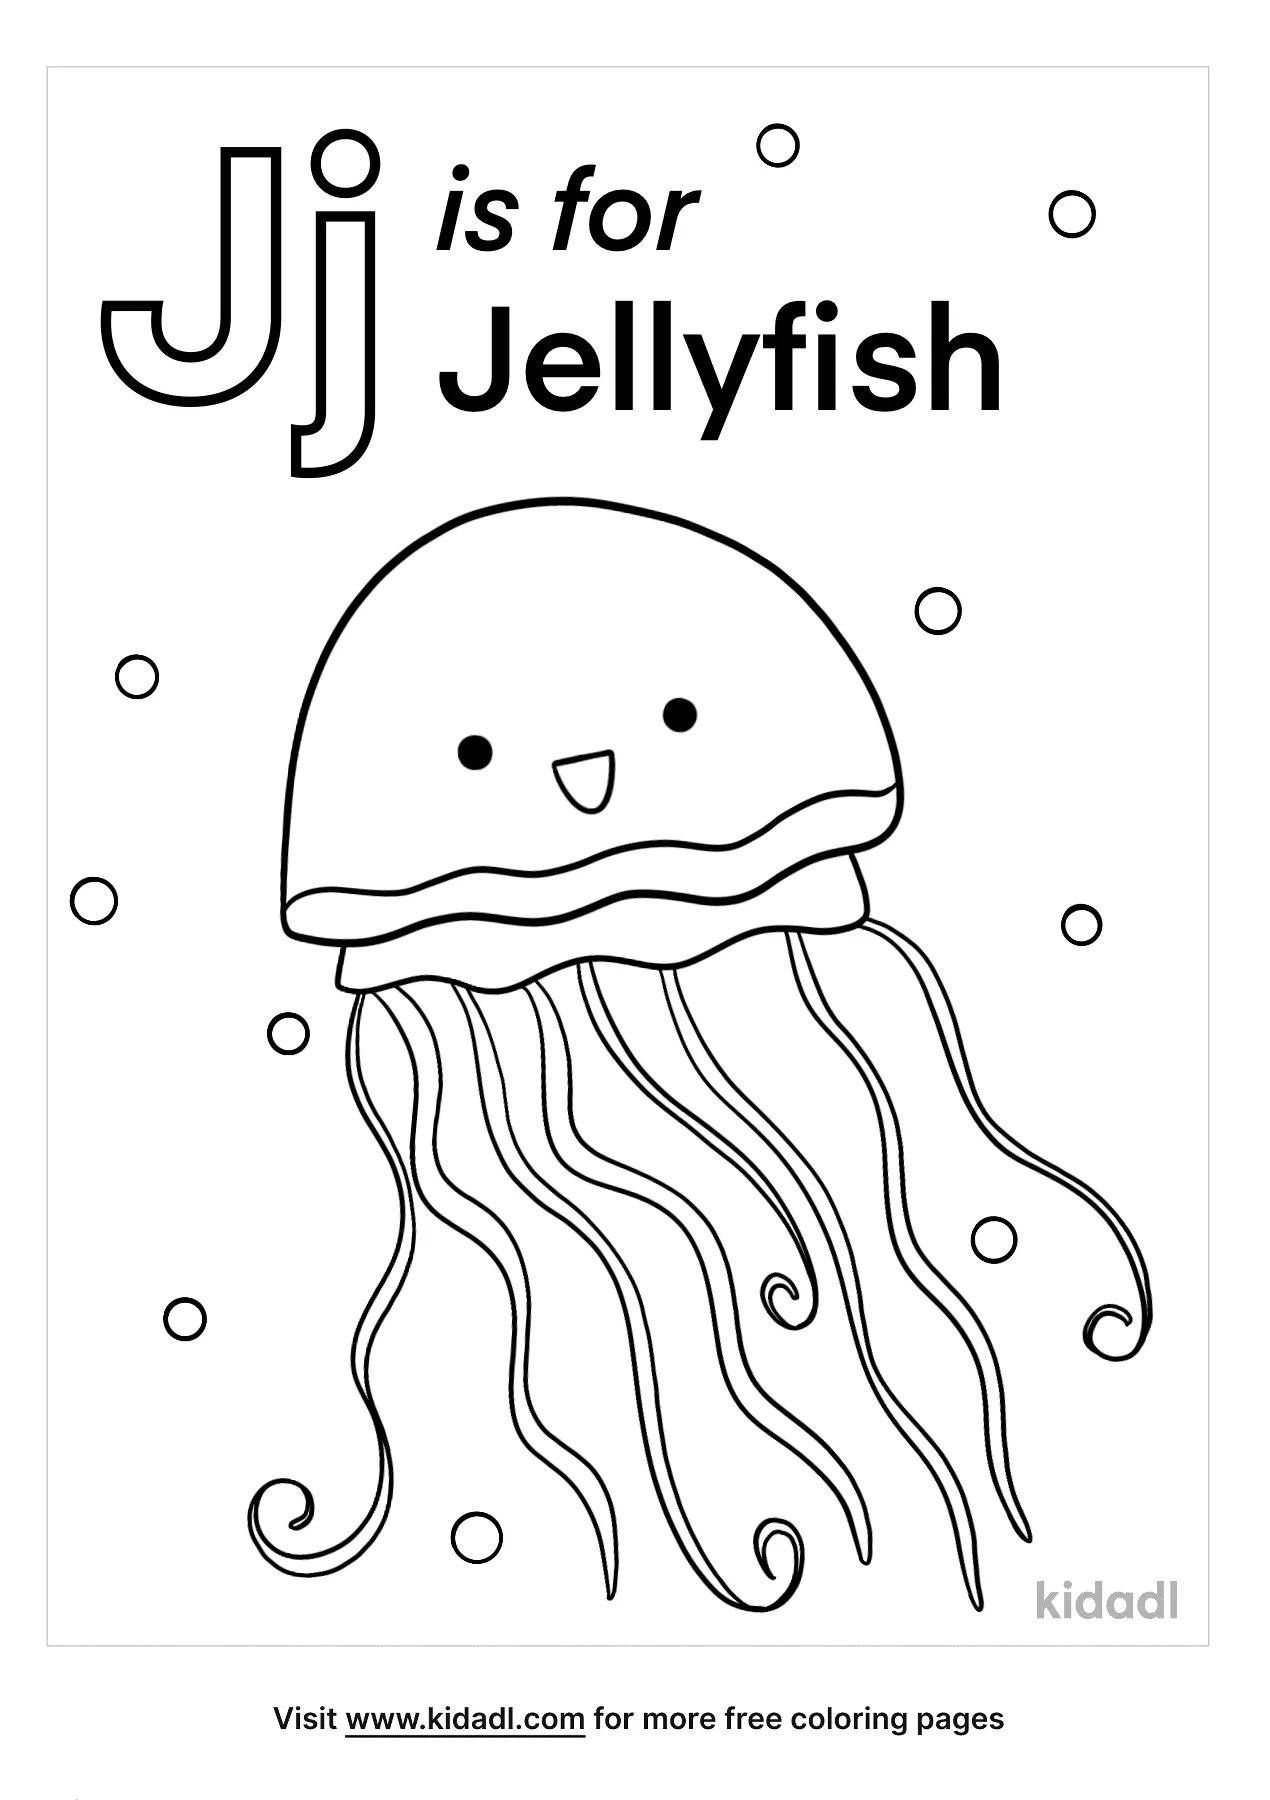 Free j is for jellyfish coloring page coloring page printables